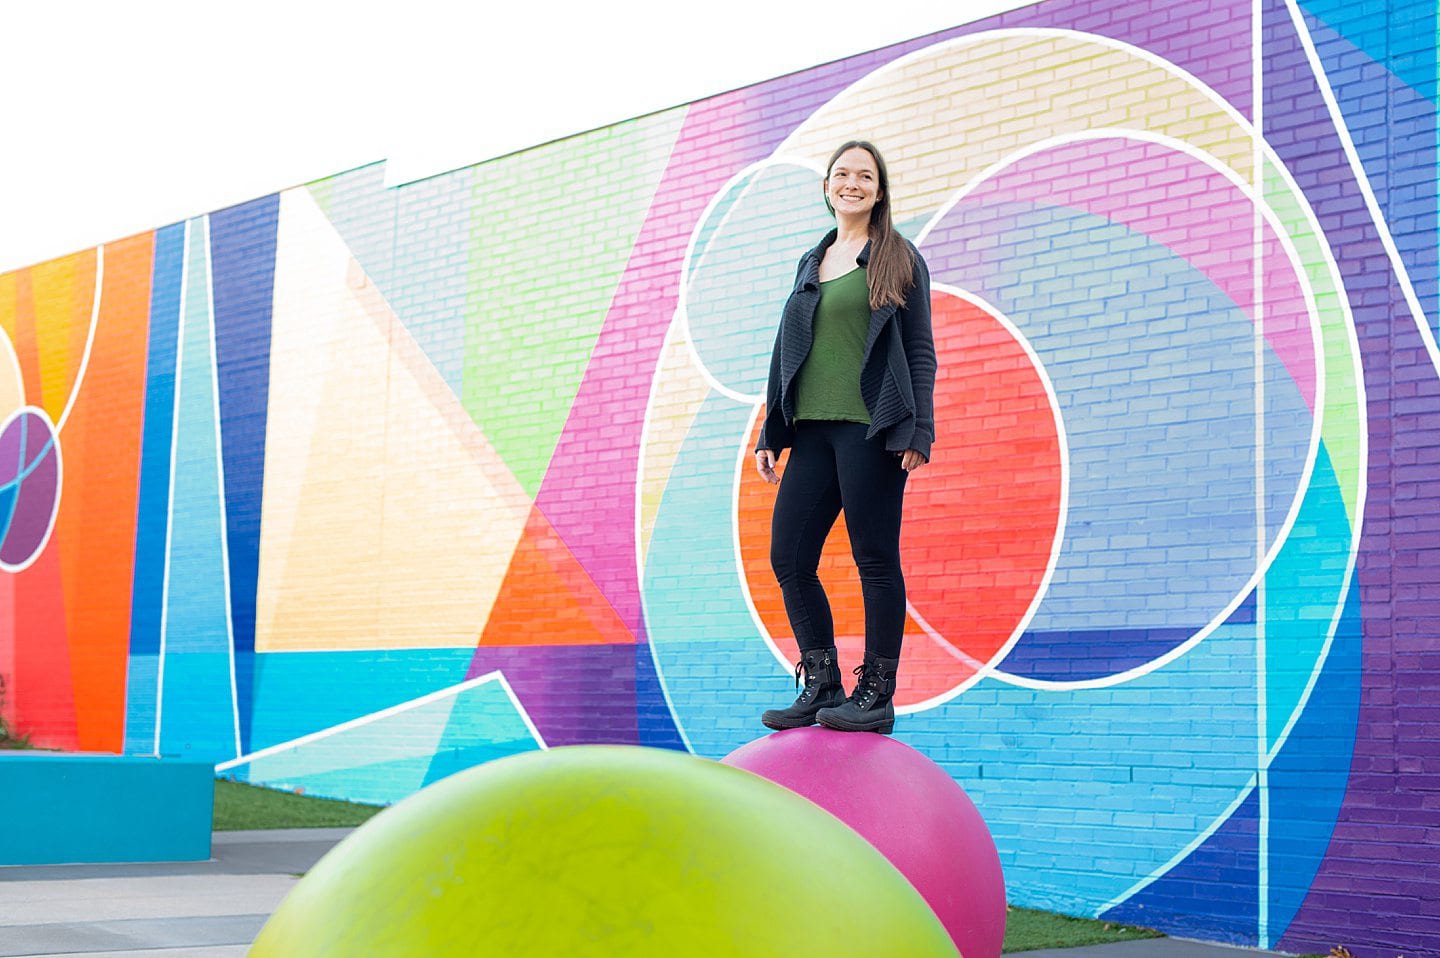 Woman on top of a large pink ball in black leggings, green top and black cardigan, with a colorful background with geometric shapes.